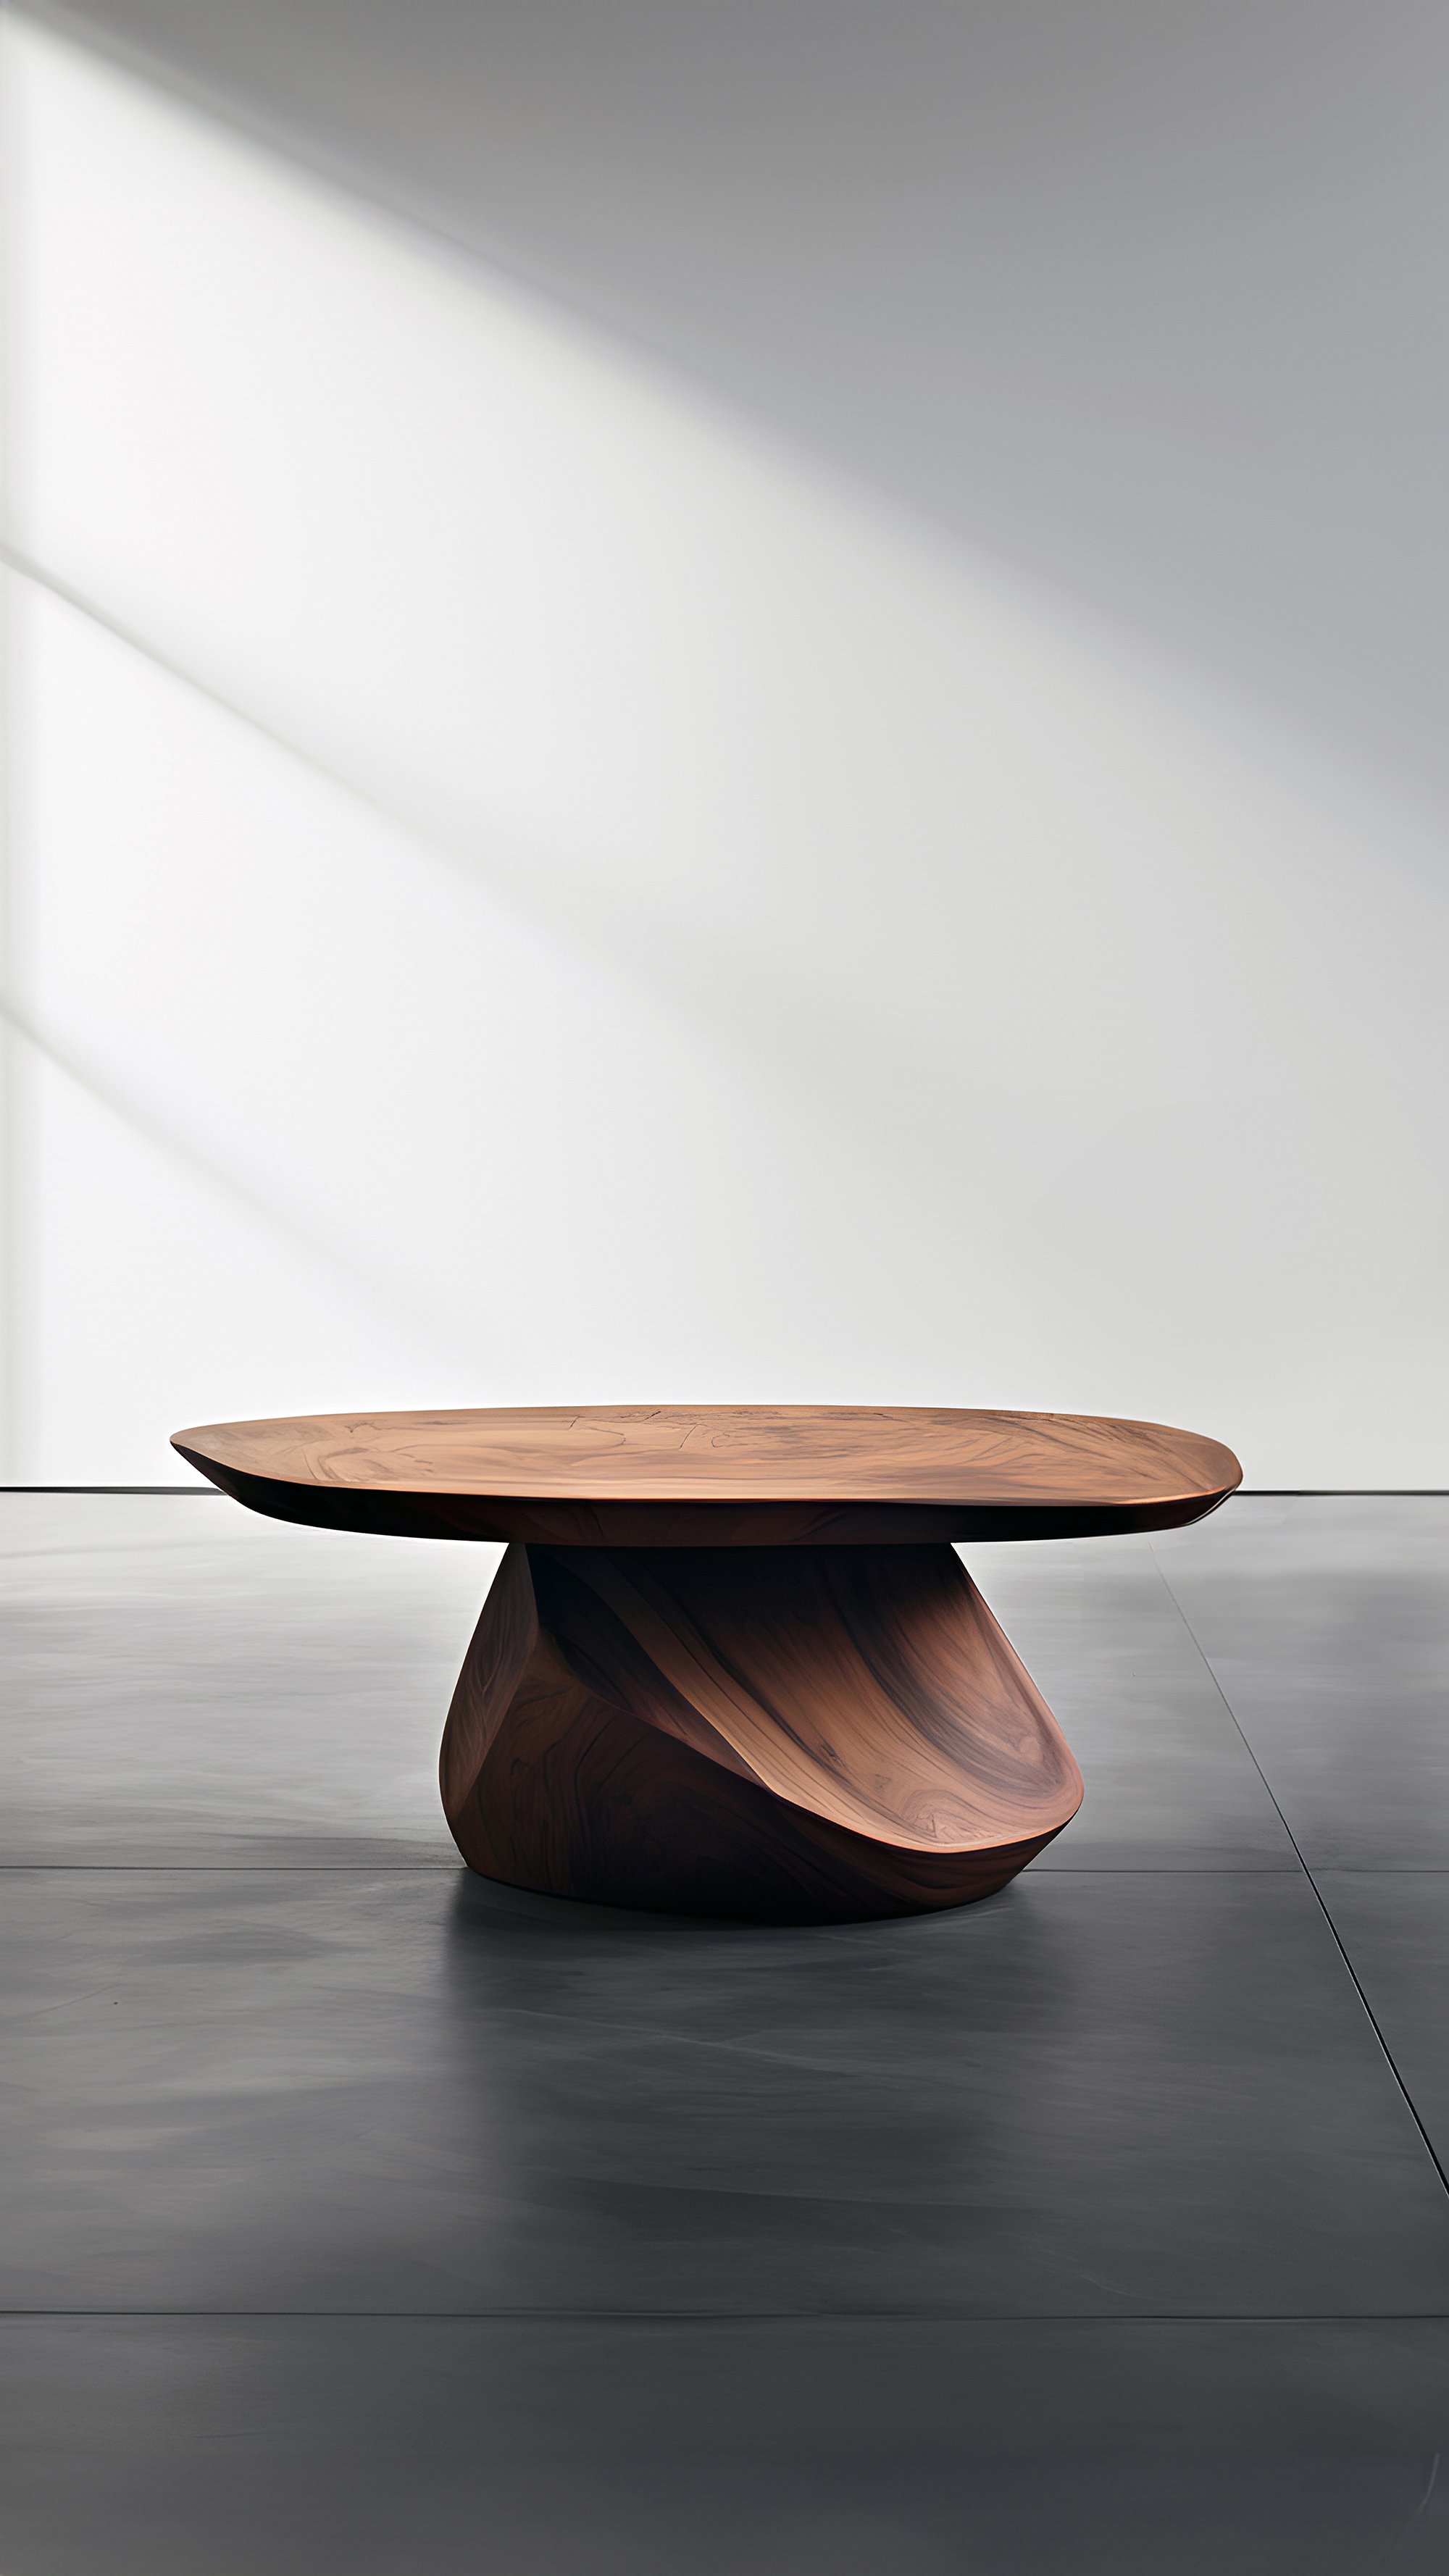 Sculptural Coffee Table Made of Solid Wood, Center Table Solace S38 by Joel Escalona — 6.jpg